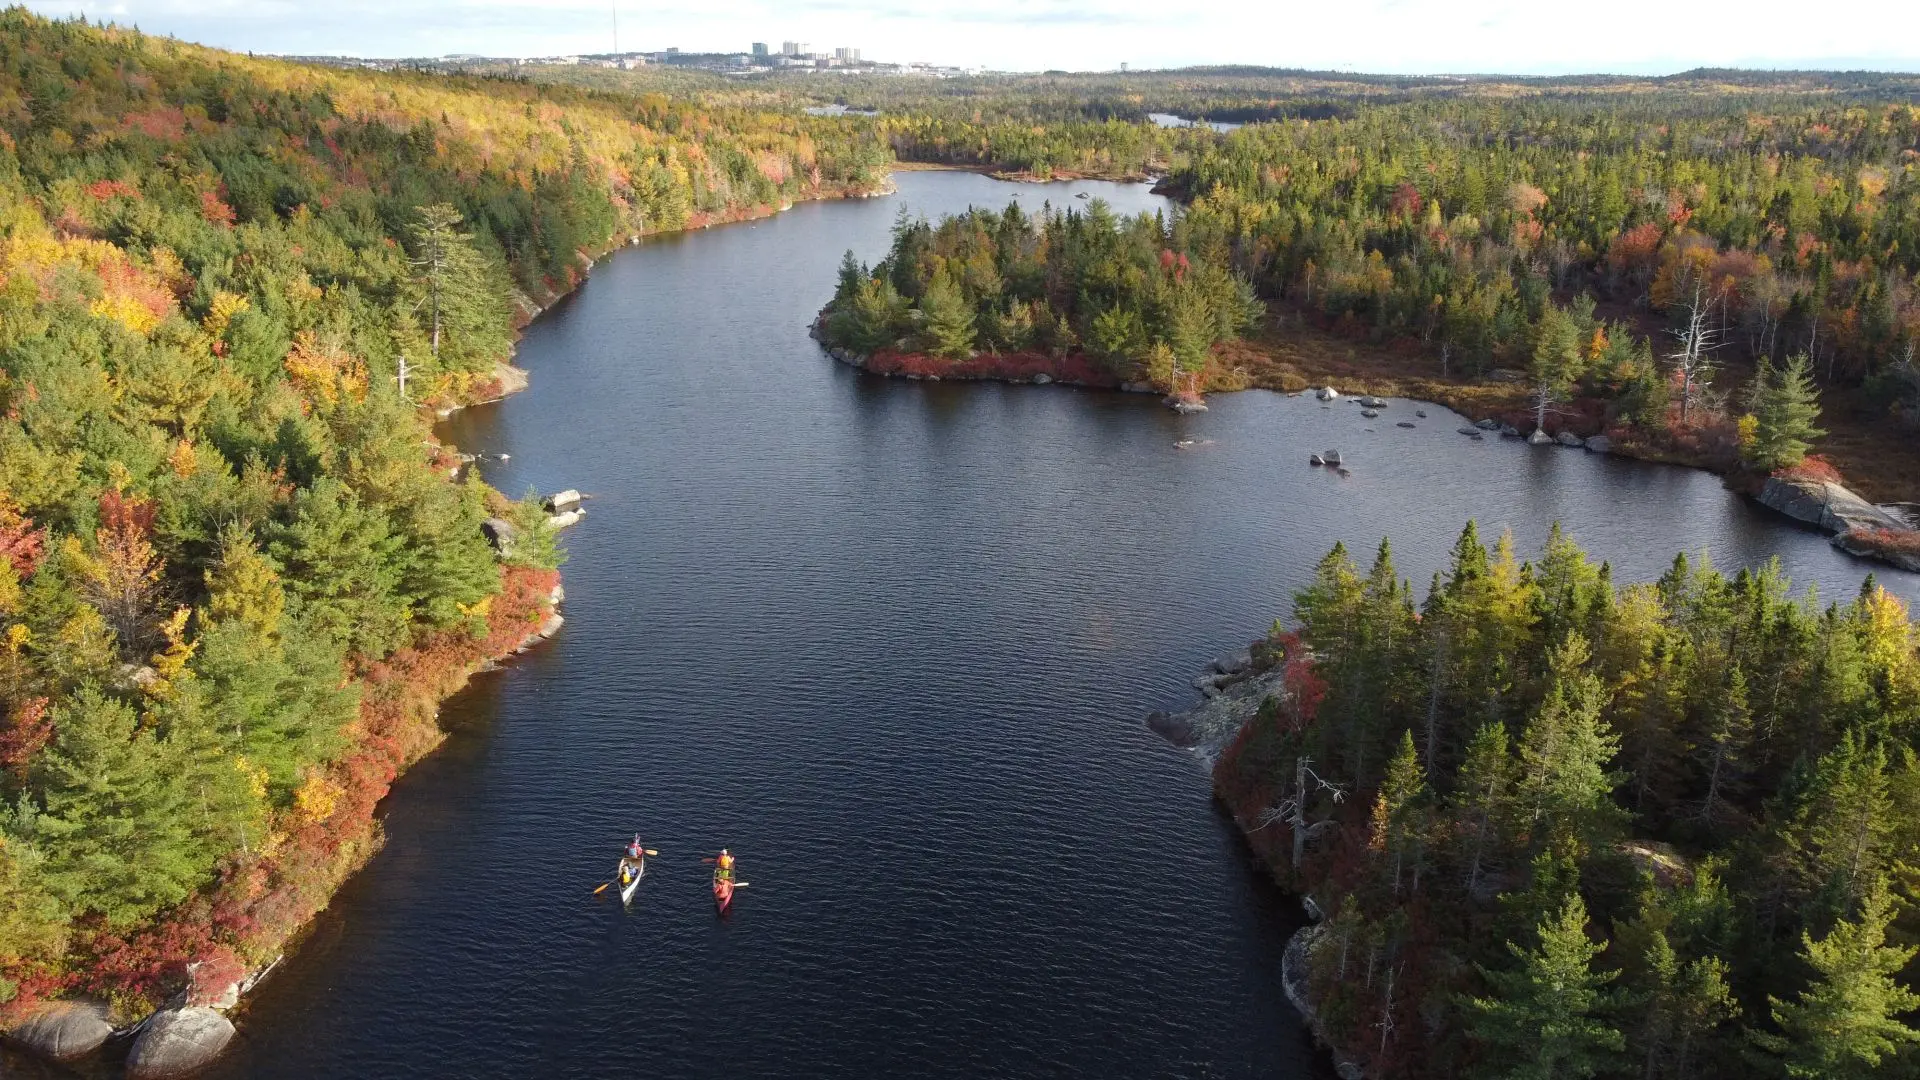 Blue Mountain-Birch Cove Lakes in Halifax is the first national urban park in Nova Scotia and among the first in Canada